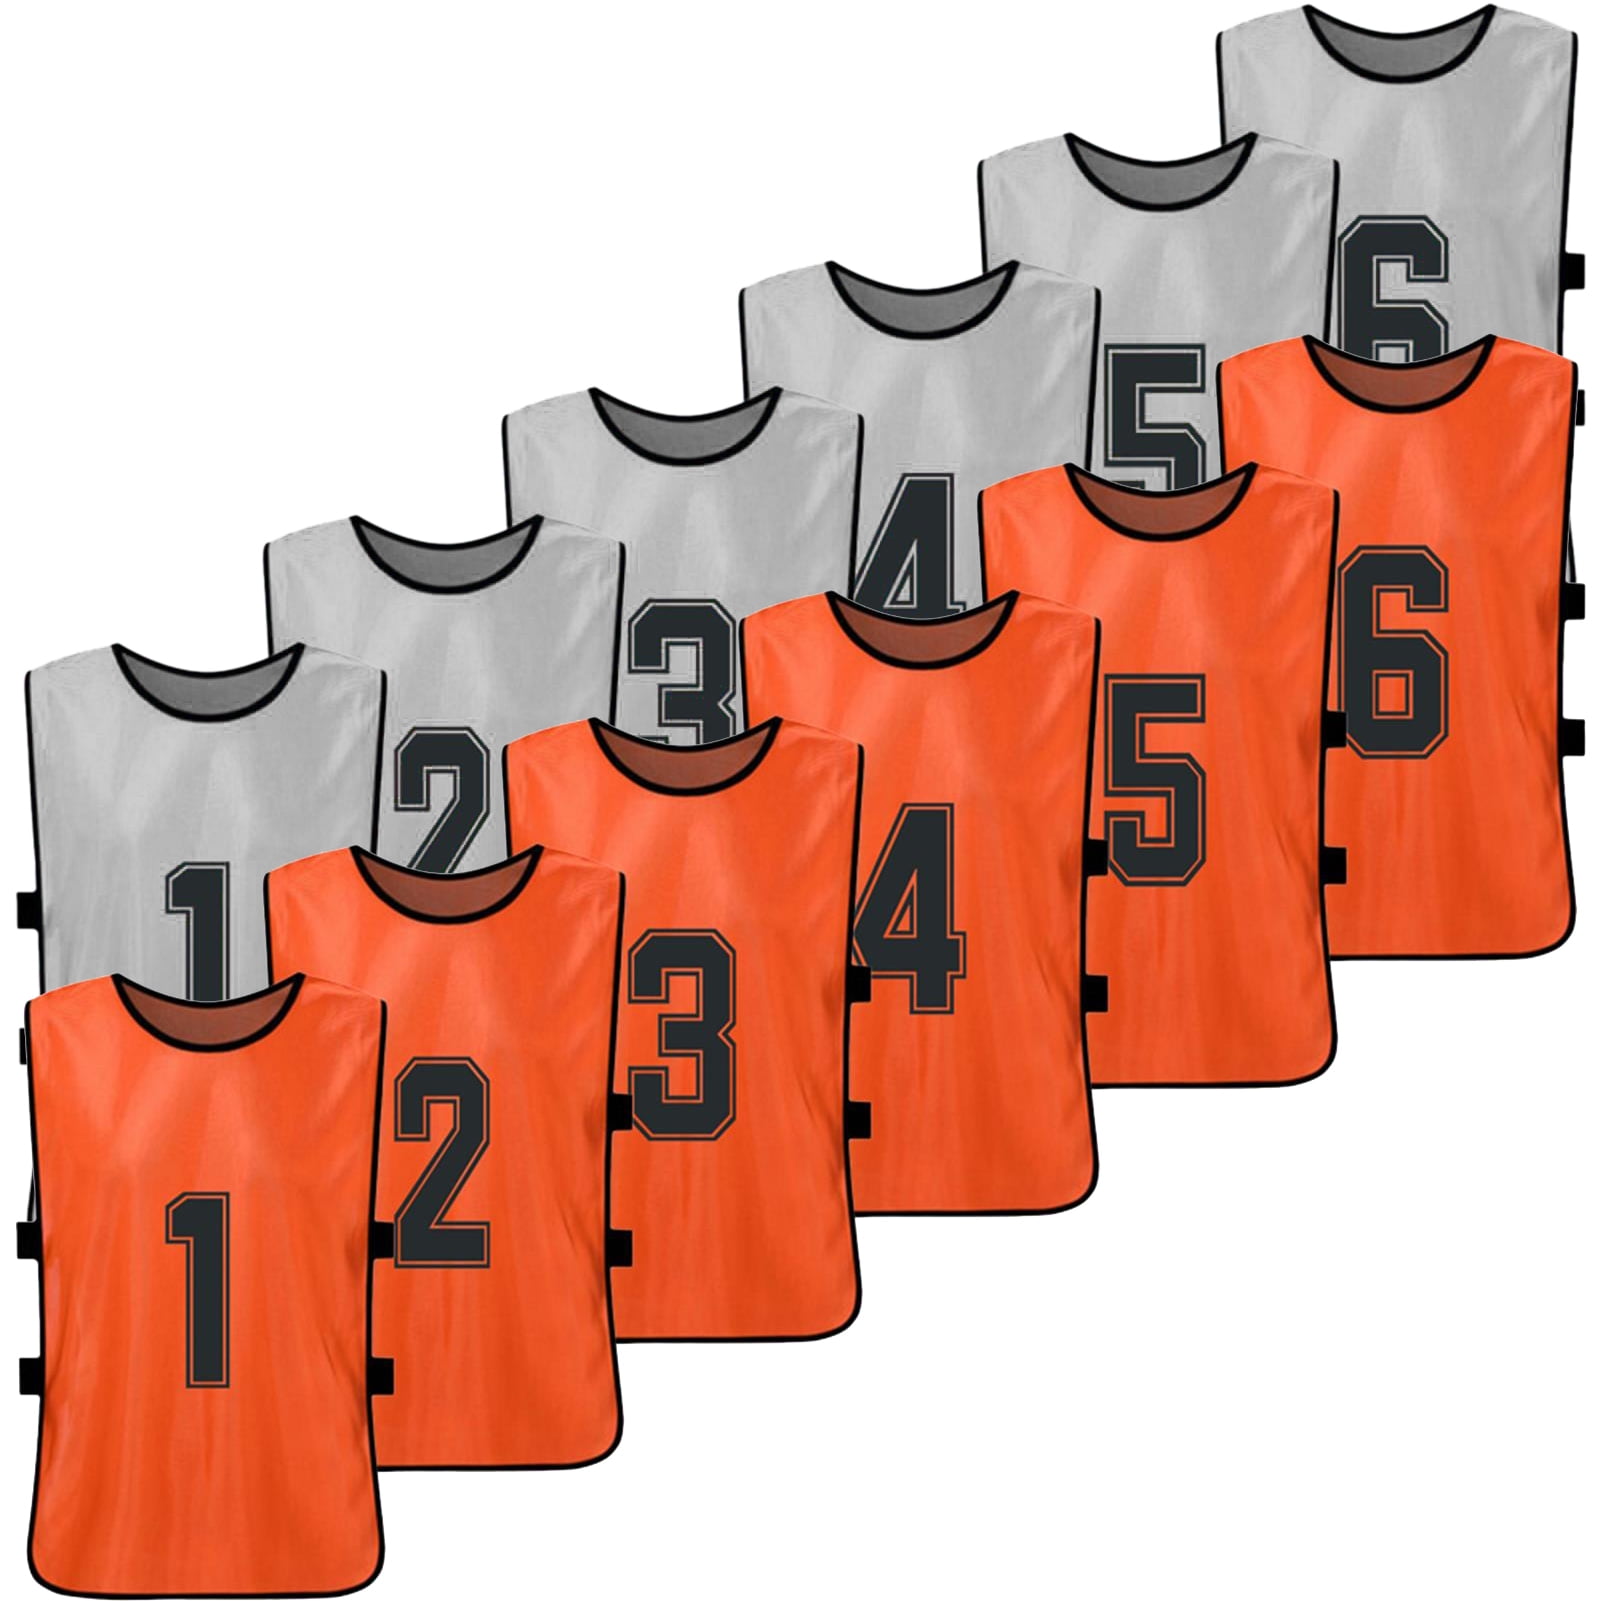 Maboto 12 Pcs Kid's Football Pinnies 2 Colors Quick Drying Soccer Jerseys Youth Sports Scrimmage Basketball Team Training Numbered Bibs Practice